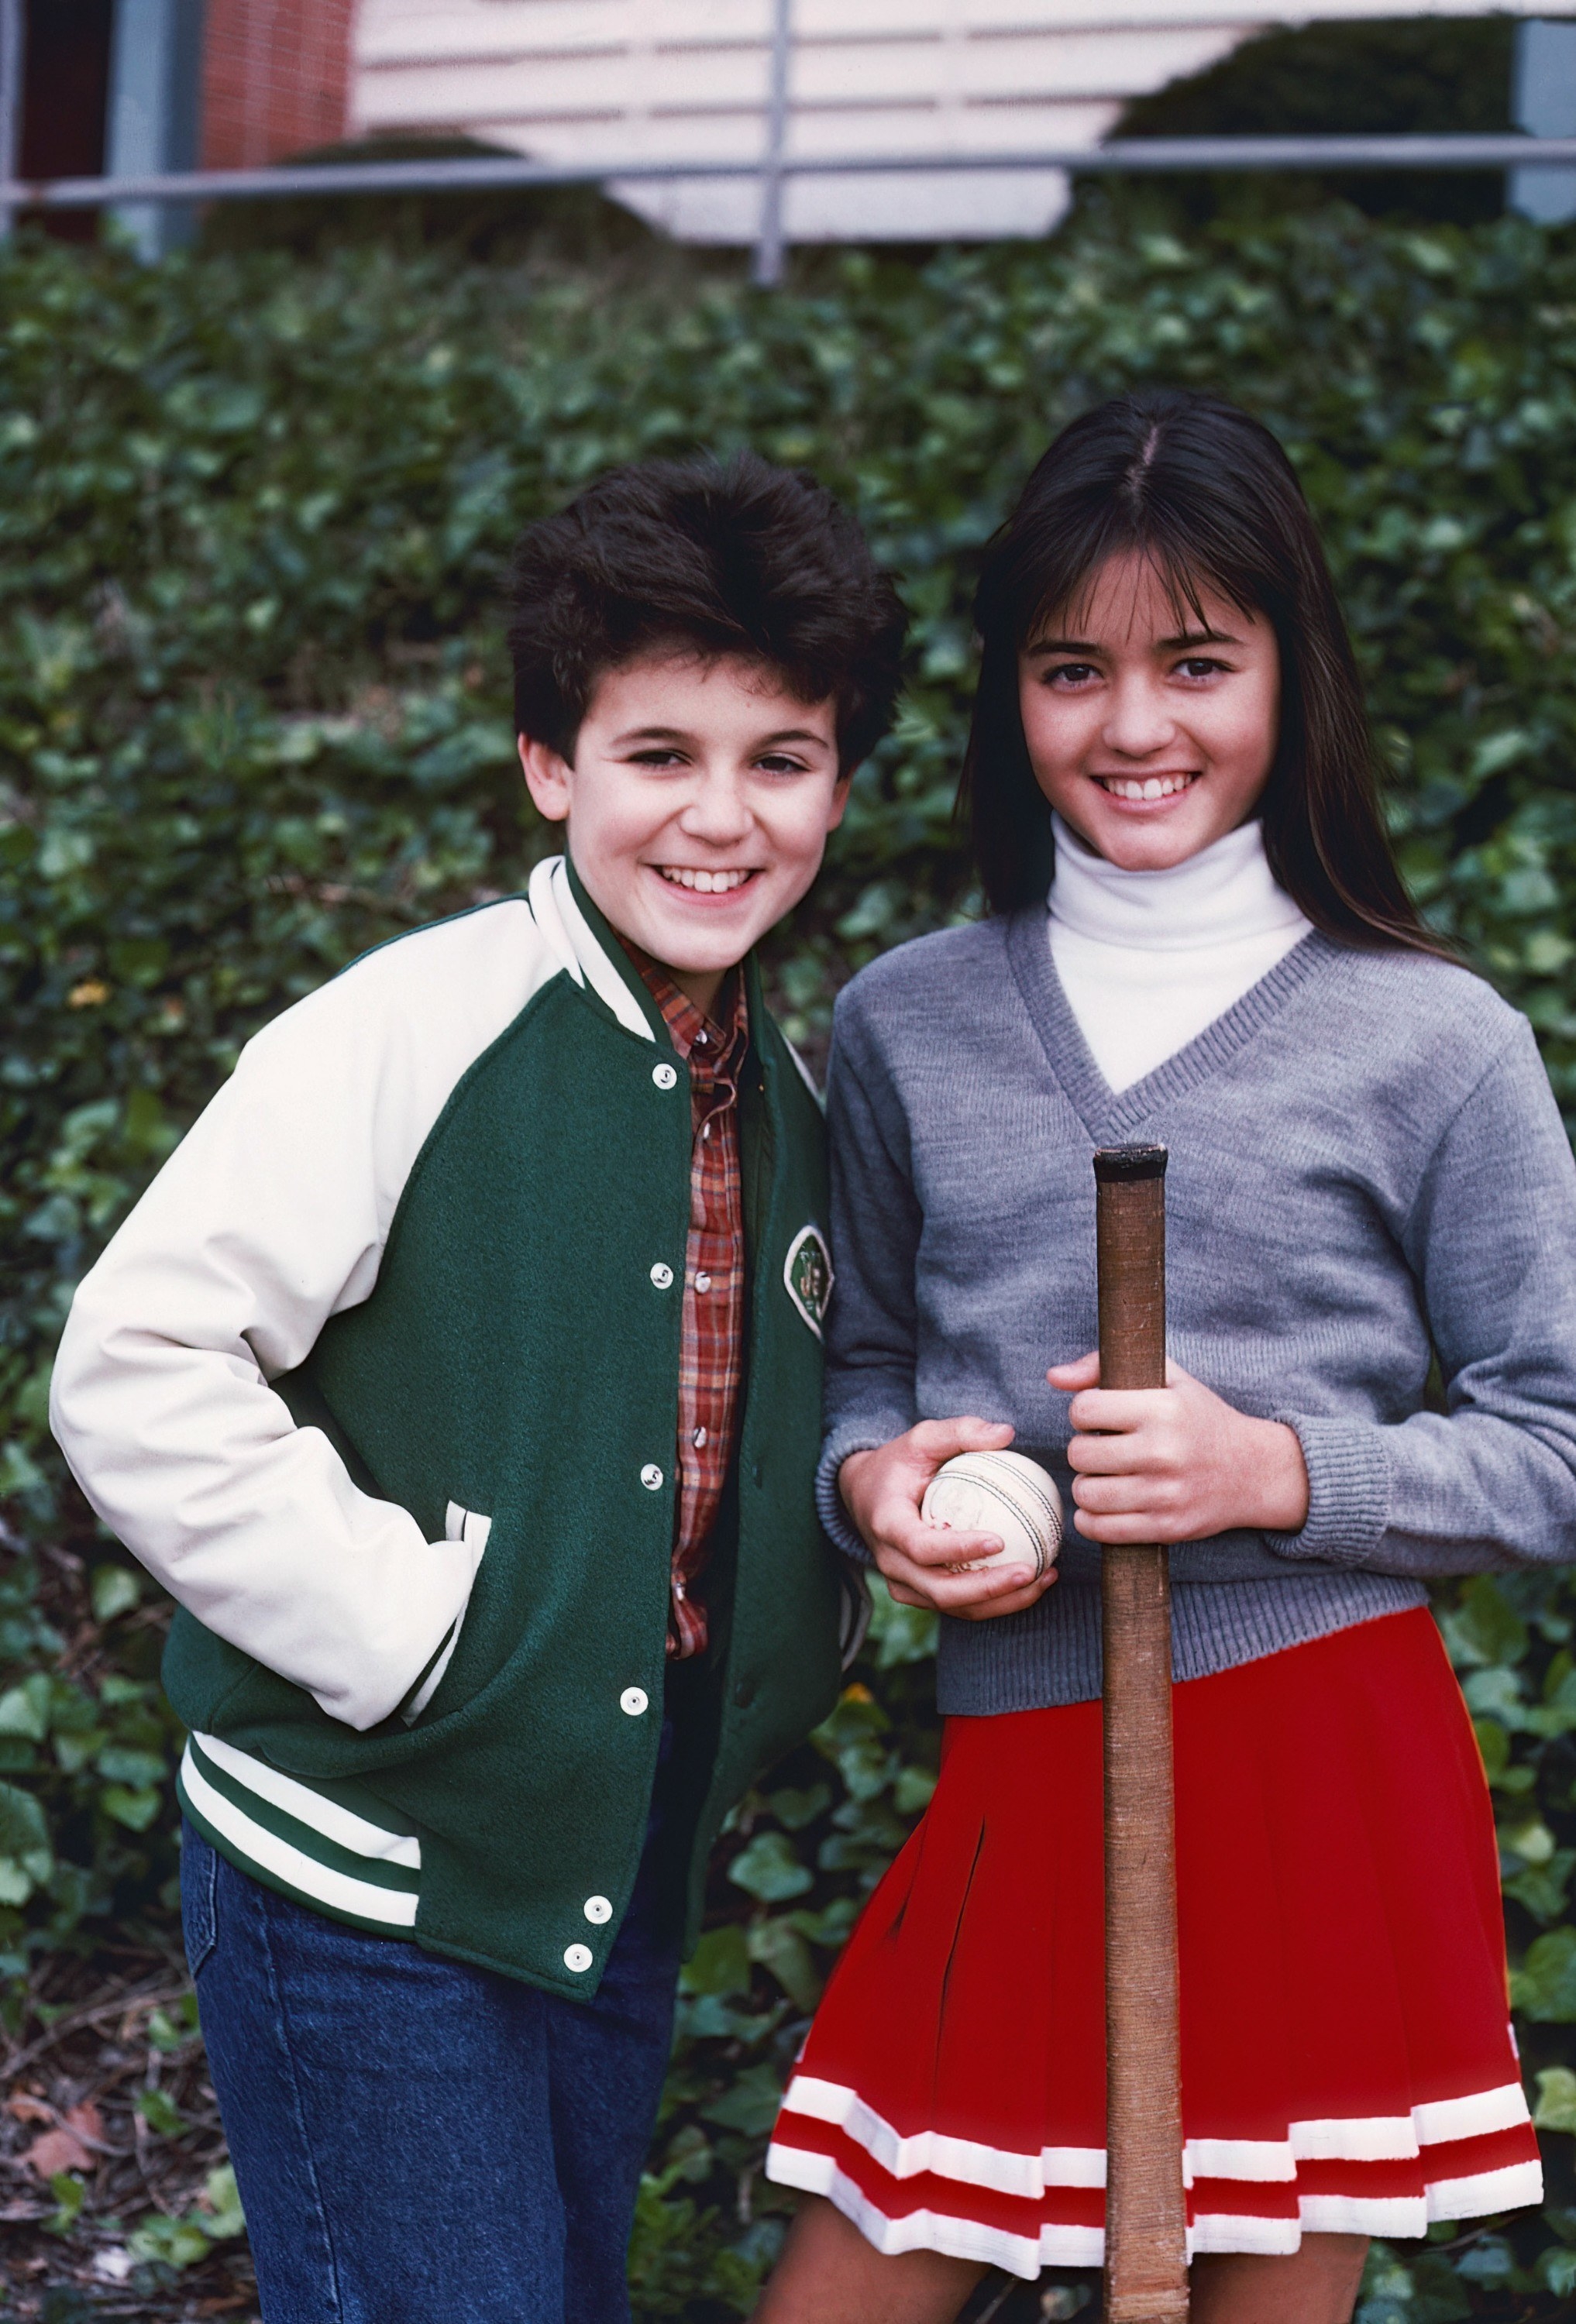 A throwback promo photo of Winnie on the right and Fred Savage on the left. They&#x27;re standing outside wearing baseball-inspired outfits